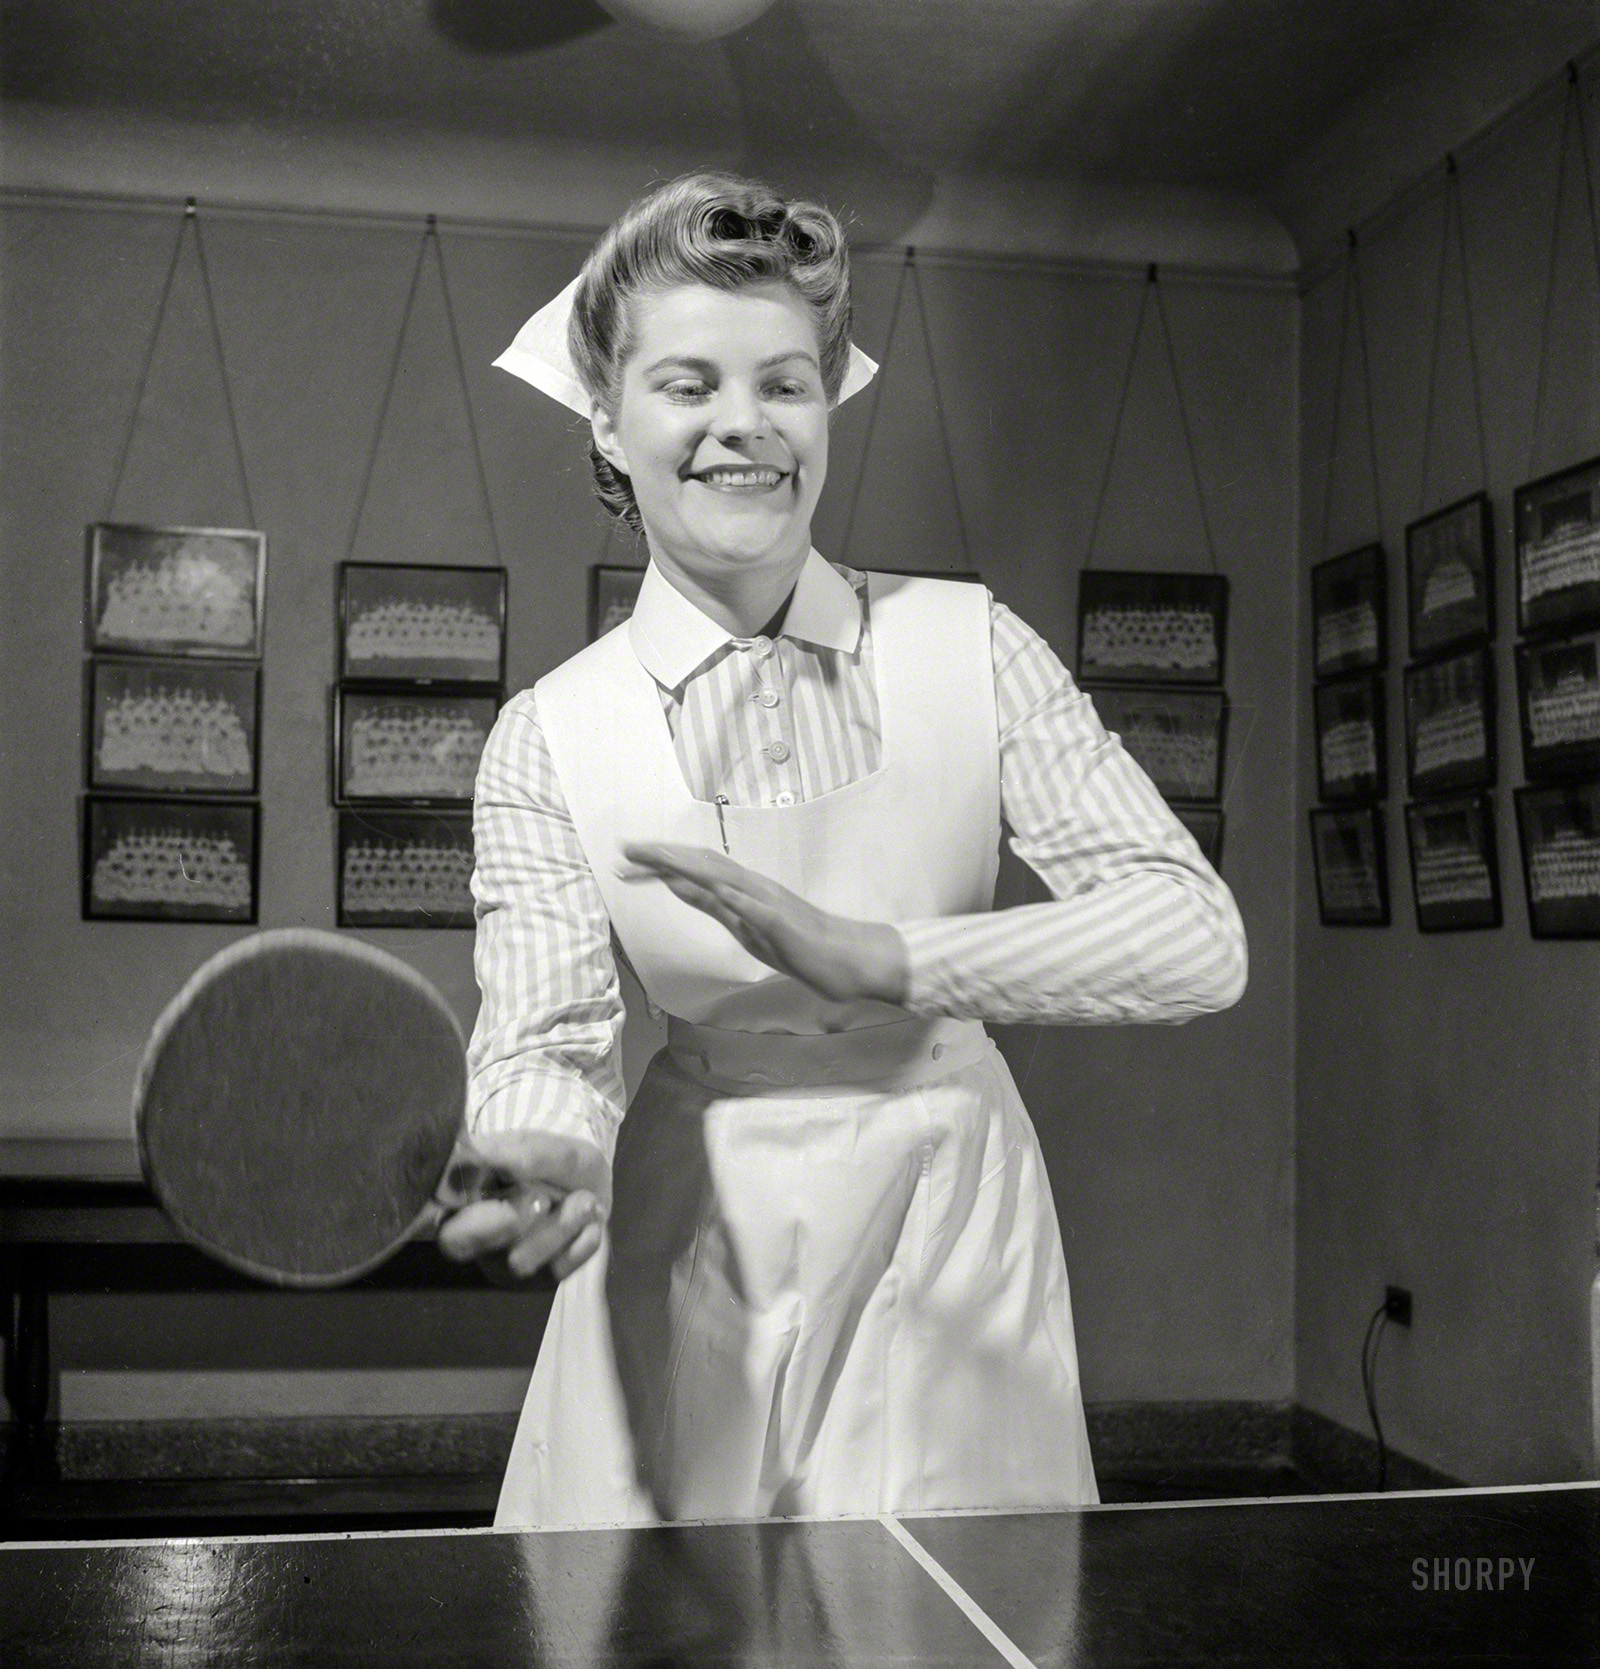 November 1942. Babies' Hospital, New York. "Nurse training. At the ping-pong table in the game room, Susan Petty, student nurse, enjoys a bit of relaxation after a busy day's work in the wards." Photo by Fritz Henle. View full size.